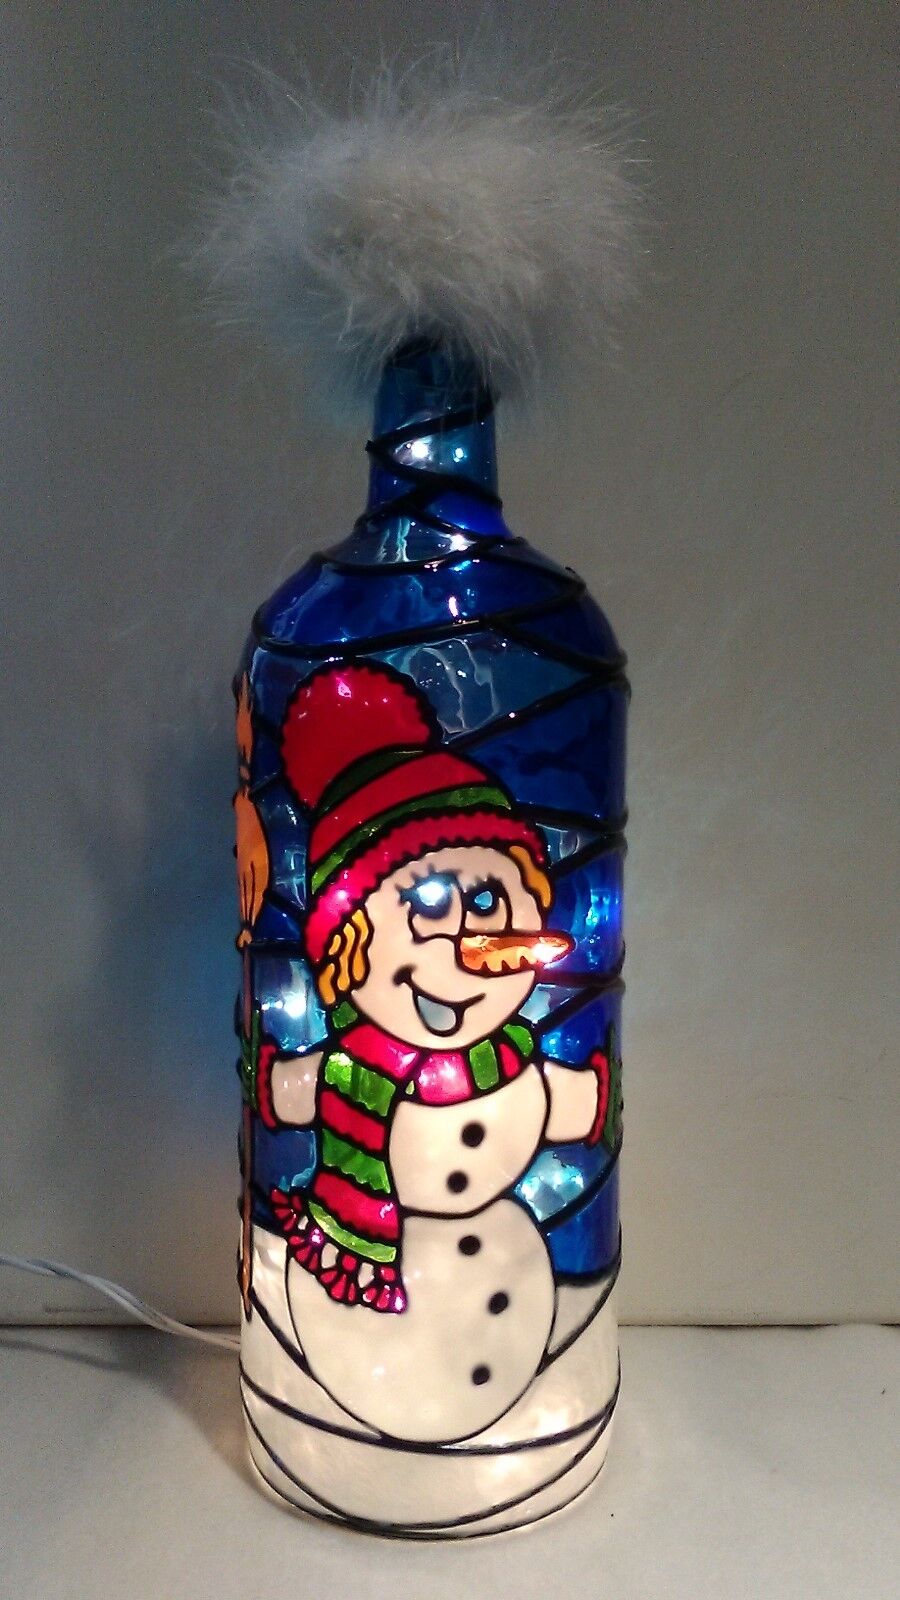 Snowman Bottle Lamp Stained Glass Look Handpainted Lighted